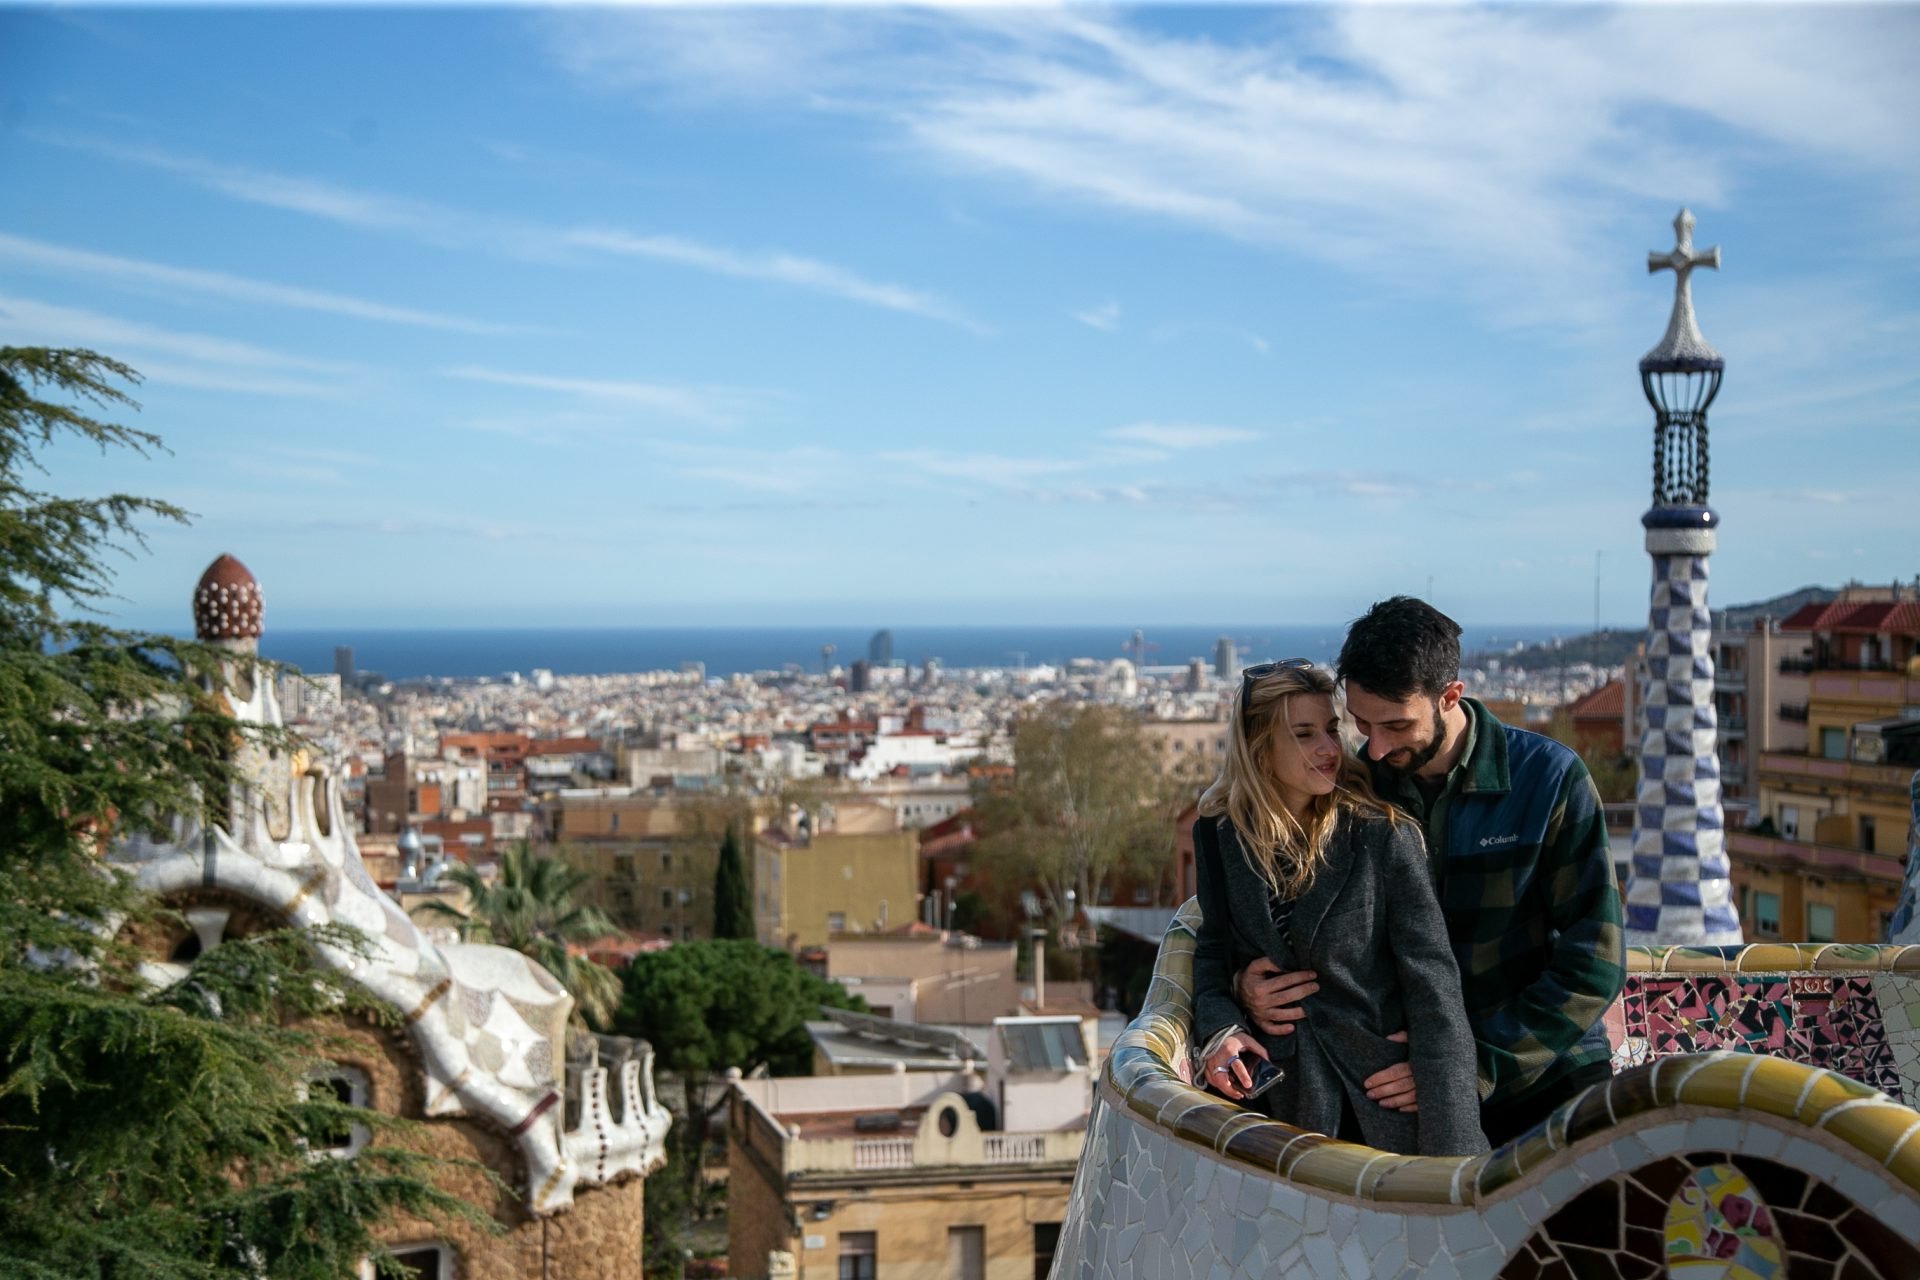 Photo spot with a view at Park Güell in Barcelona, Spain.